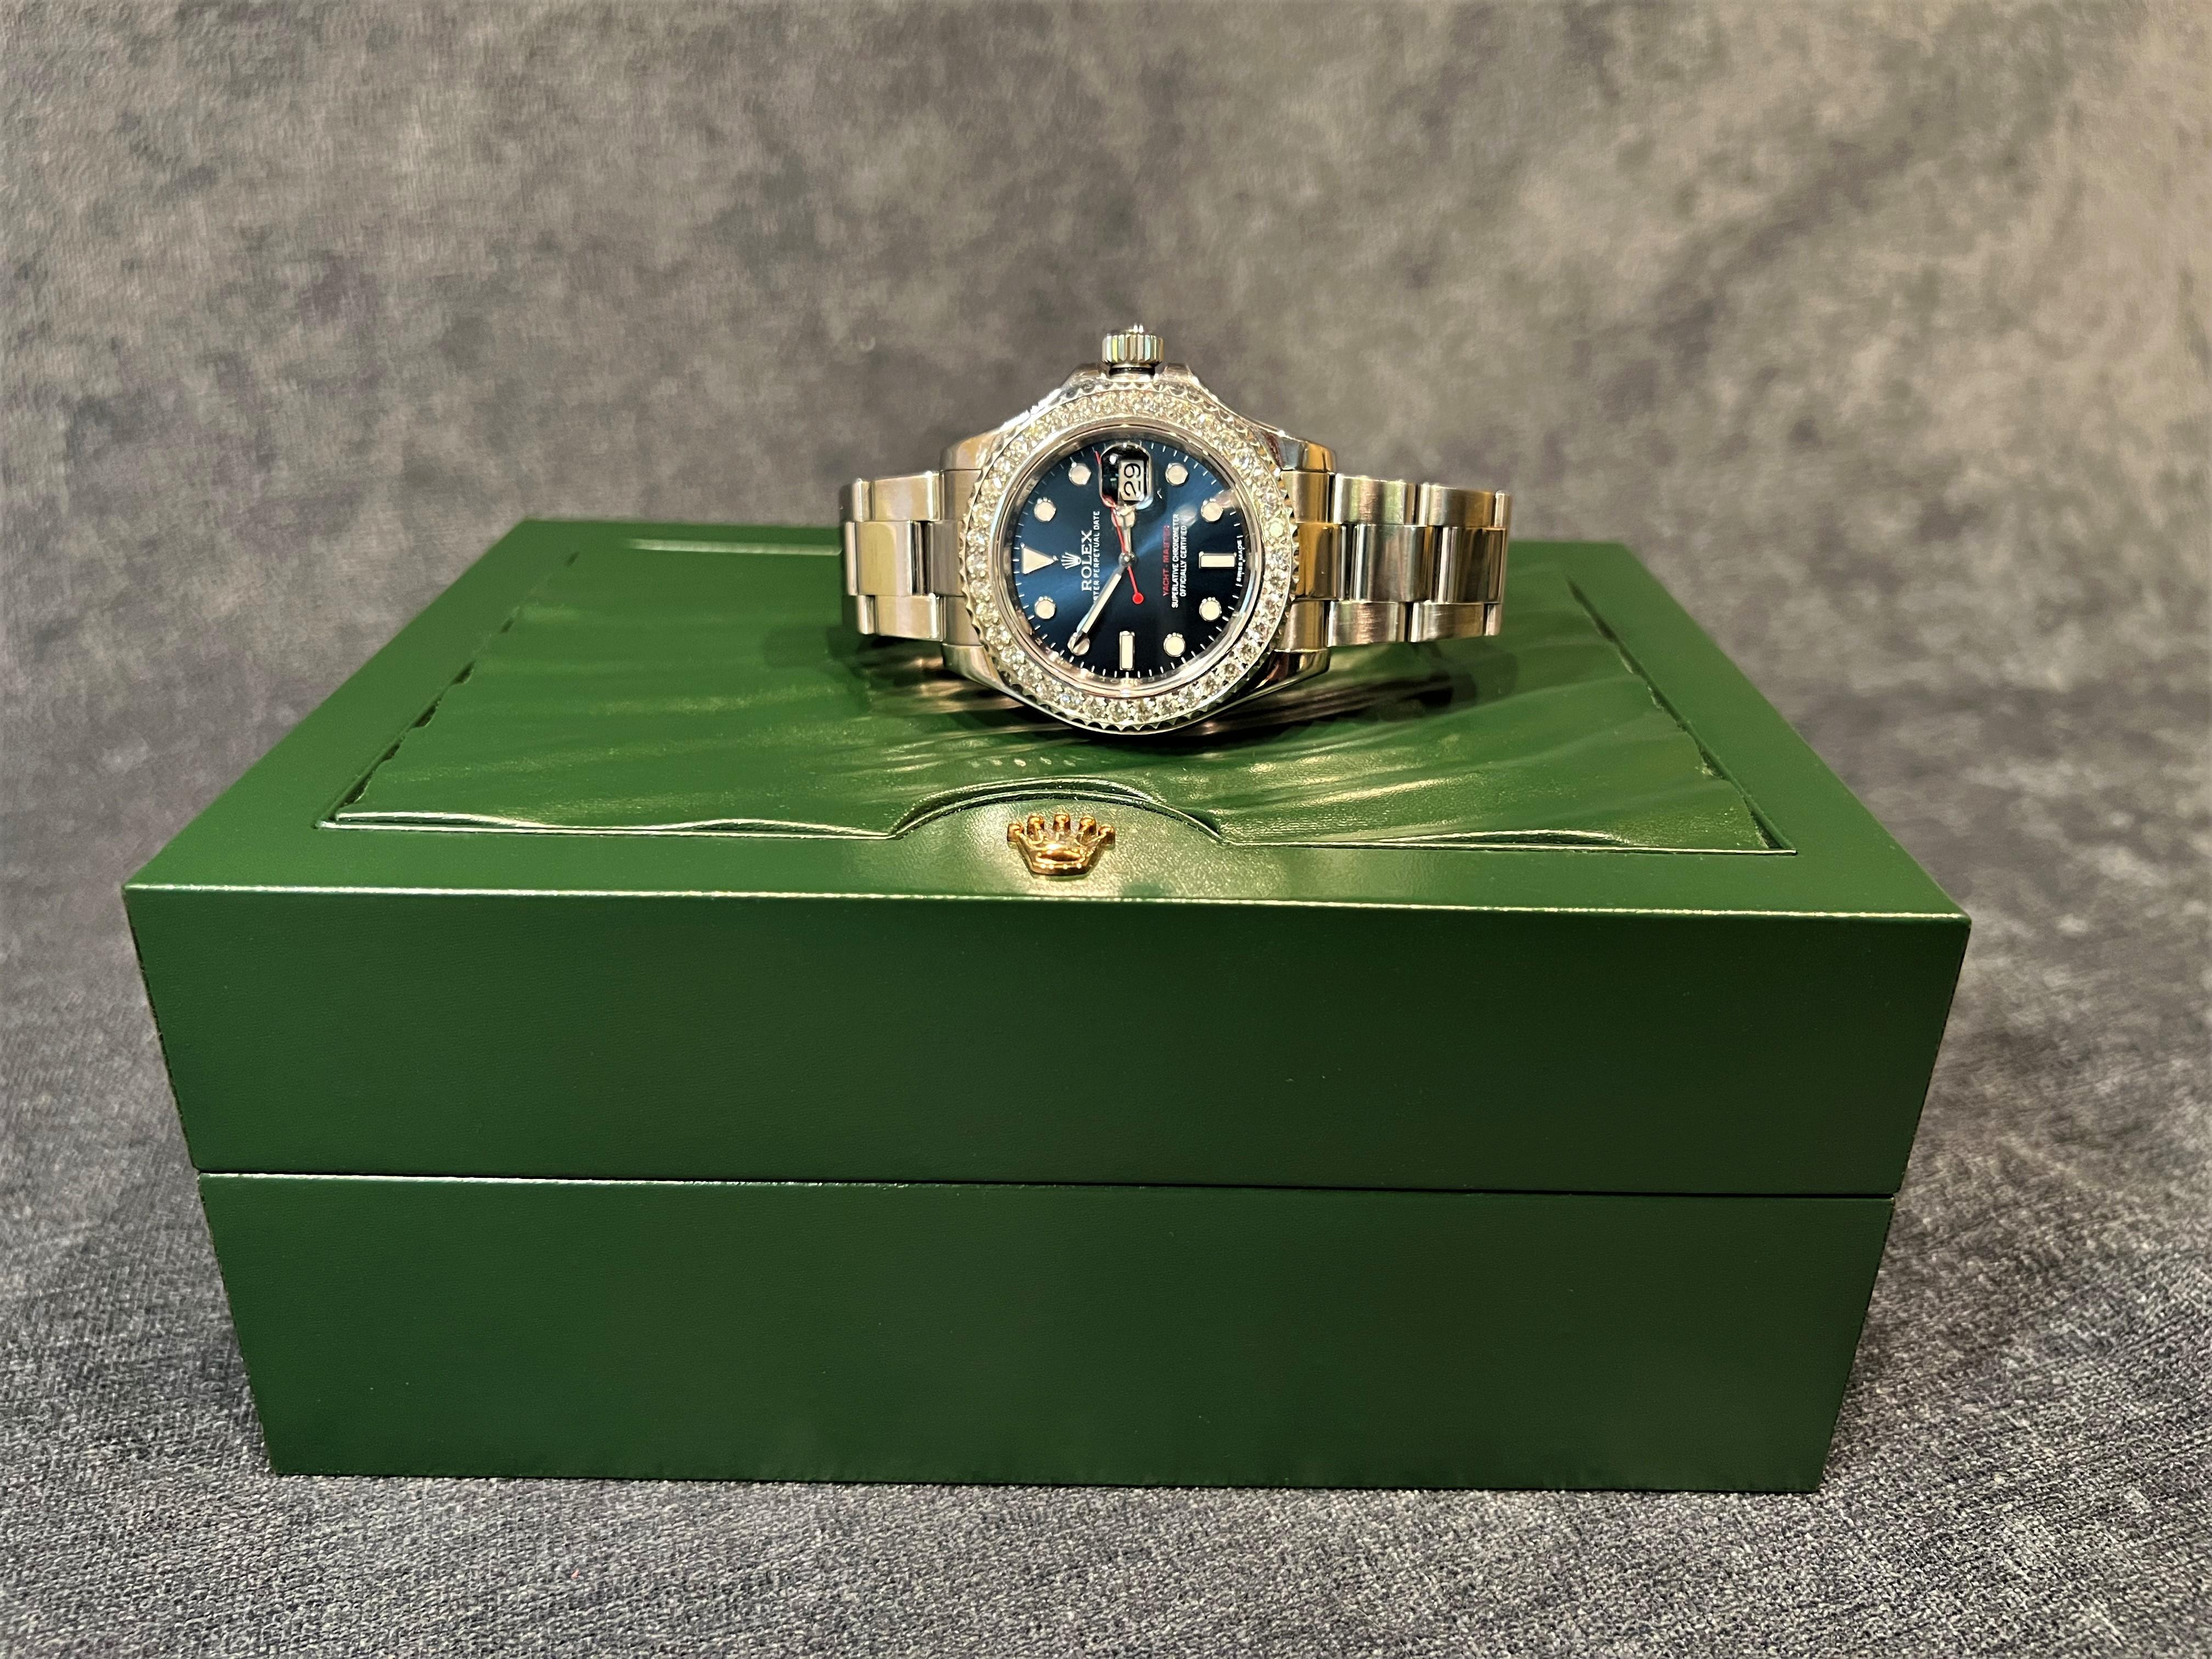 Rolex Oyster Perpetual Yacht-Master 2.56 CTW Diamond Wristwatch For Sale 5